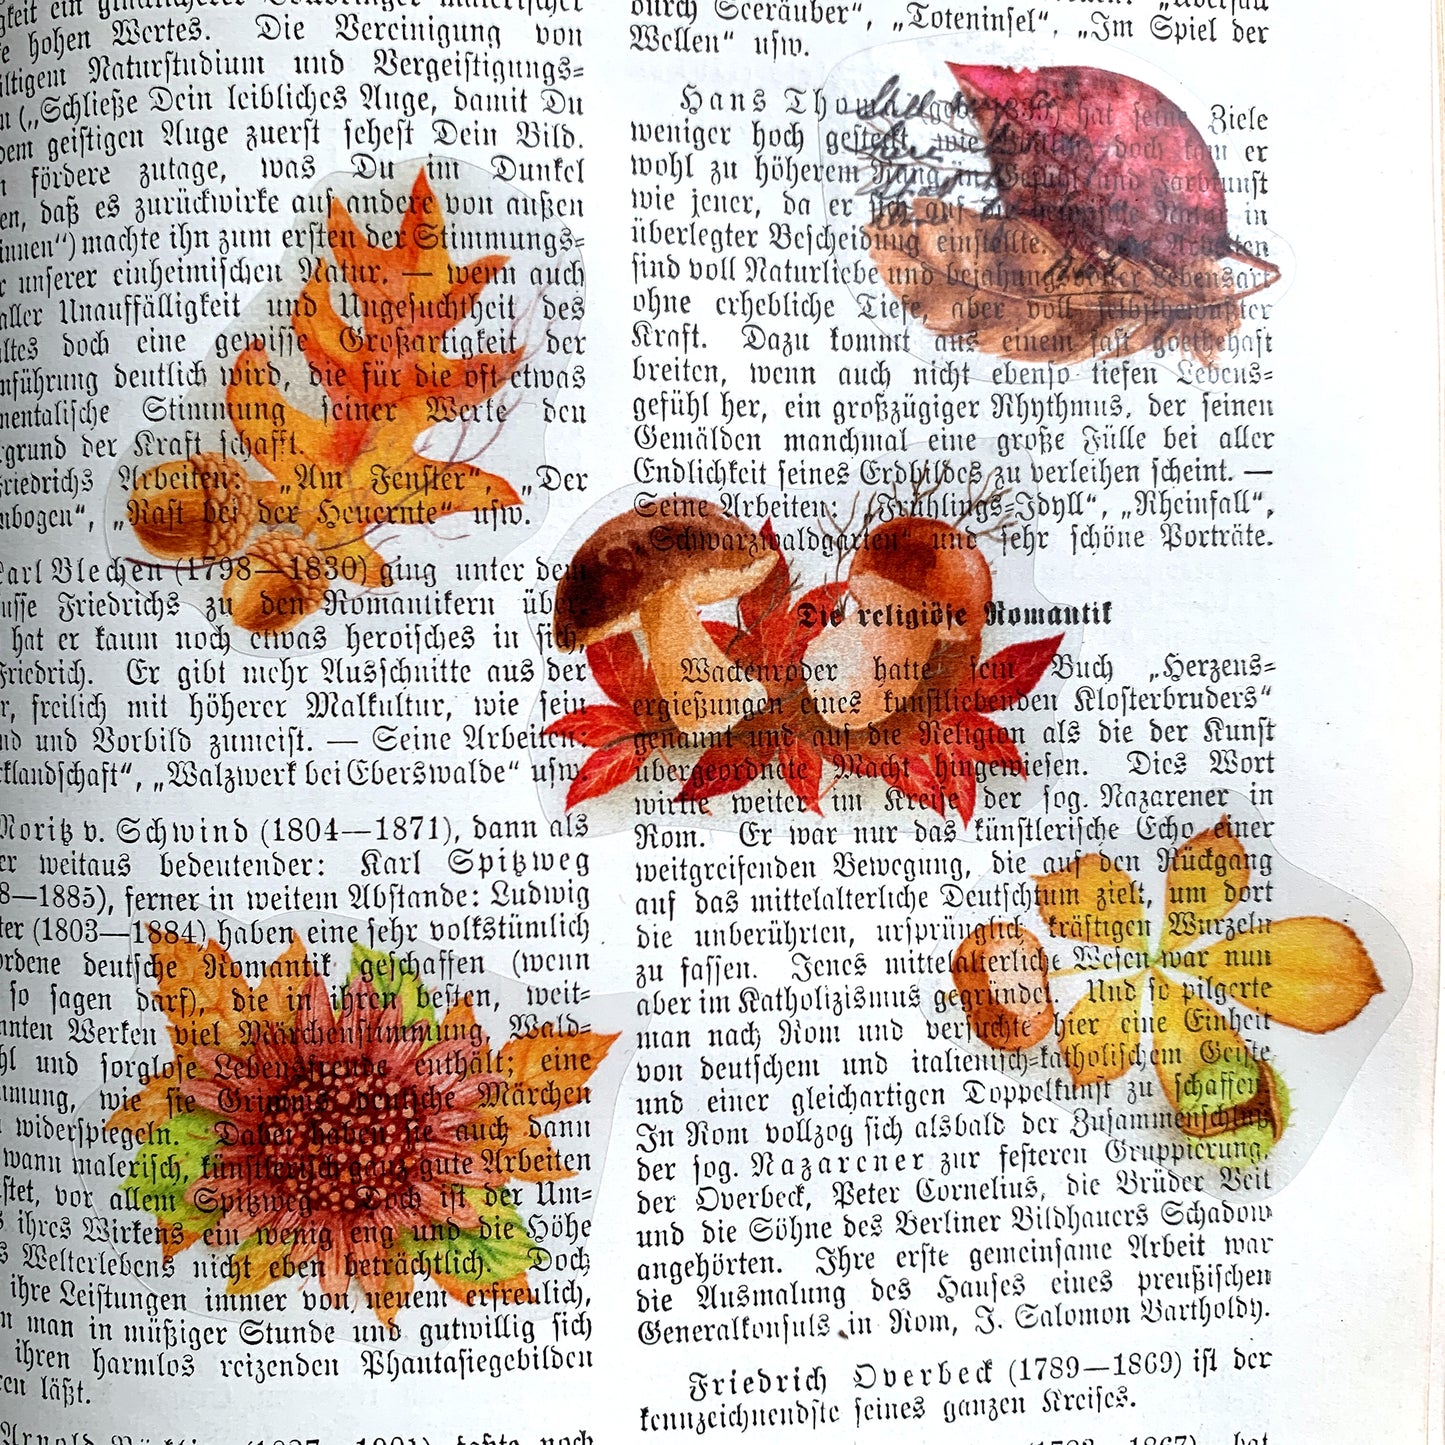 Sticker sheet 'Autumn Leaves' botanical illustrations for bullet journaling, decoration and more